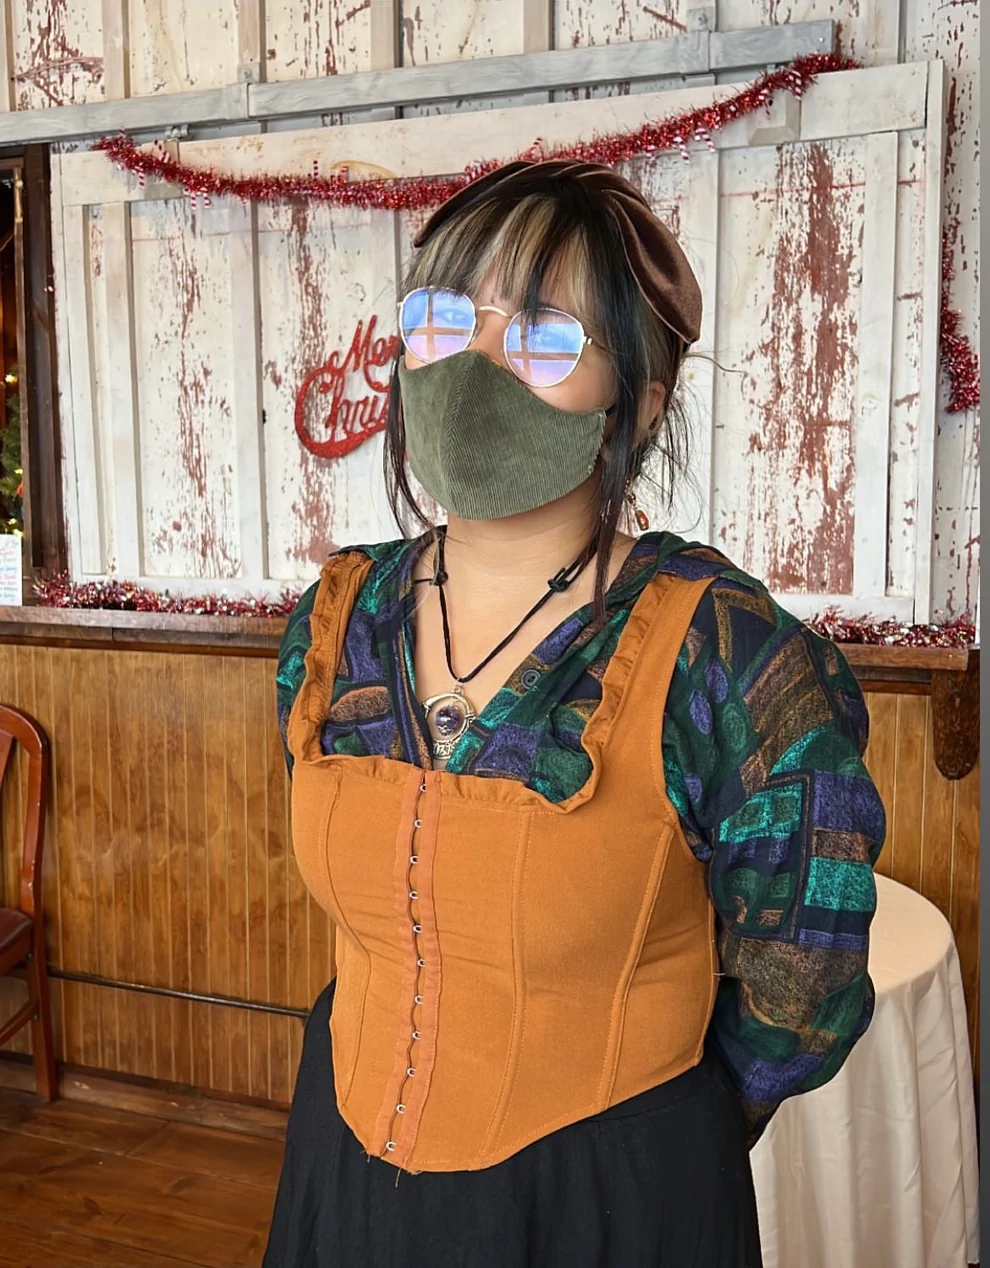 a woman wearing a green mask and an orange top.